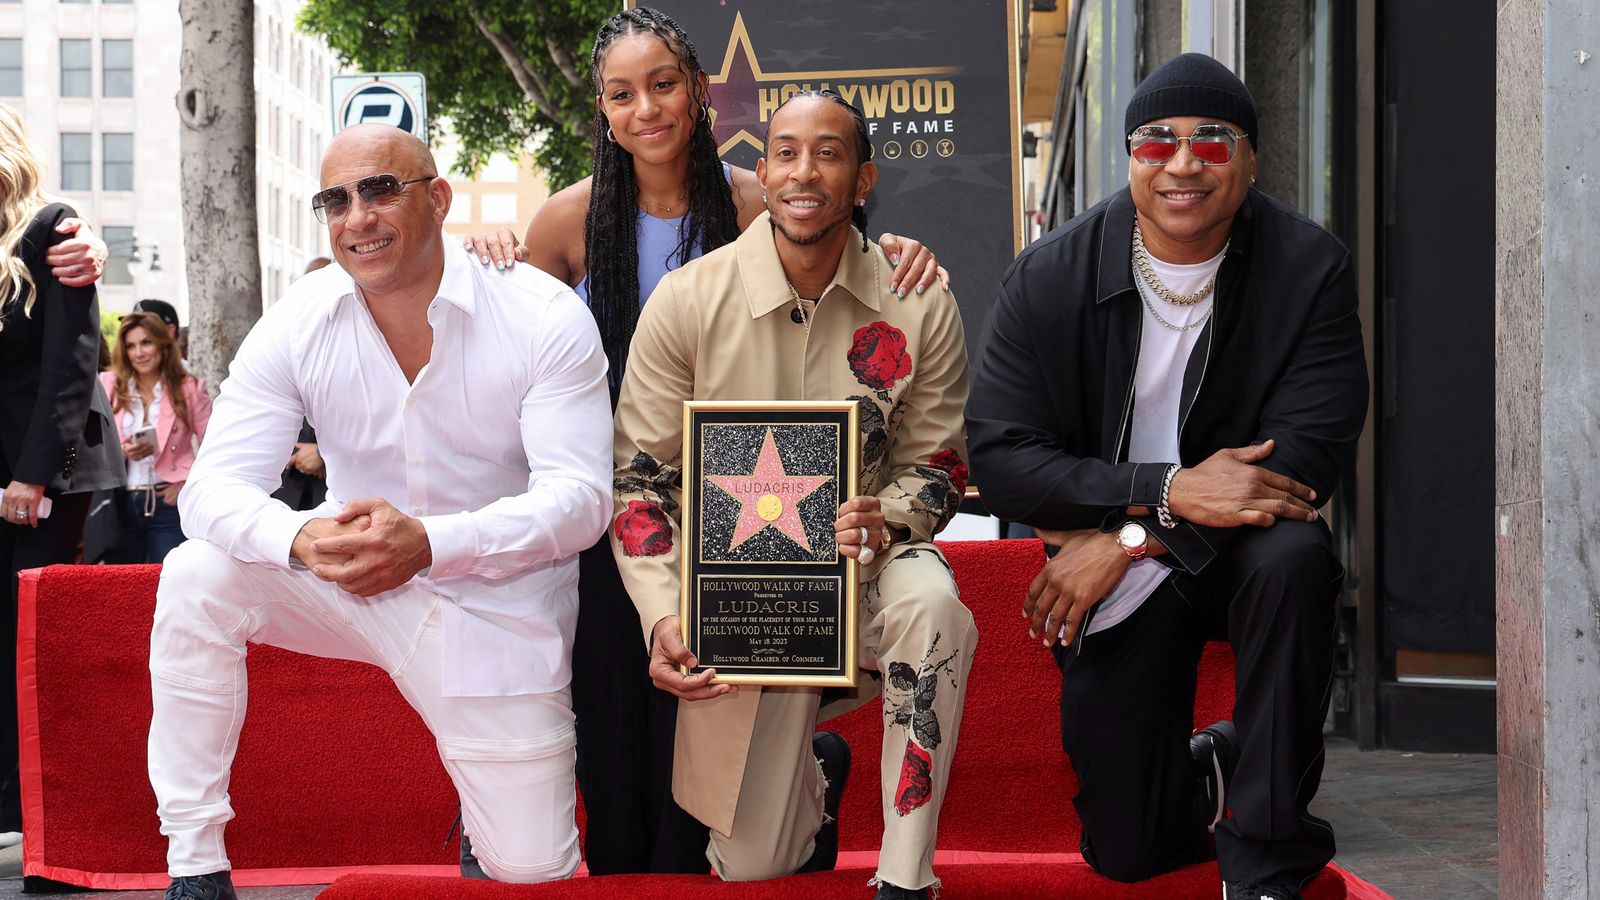 US rapper Ludacris honoured with Hollywood Walk of Fame star as Vin Diesel and LL Cool J attend ceremony